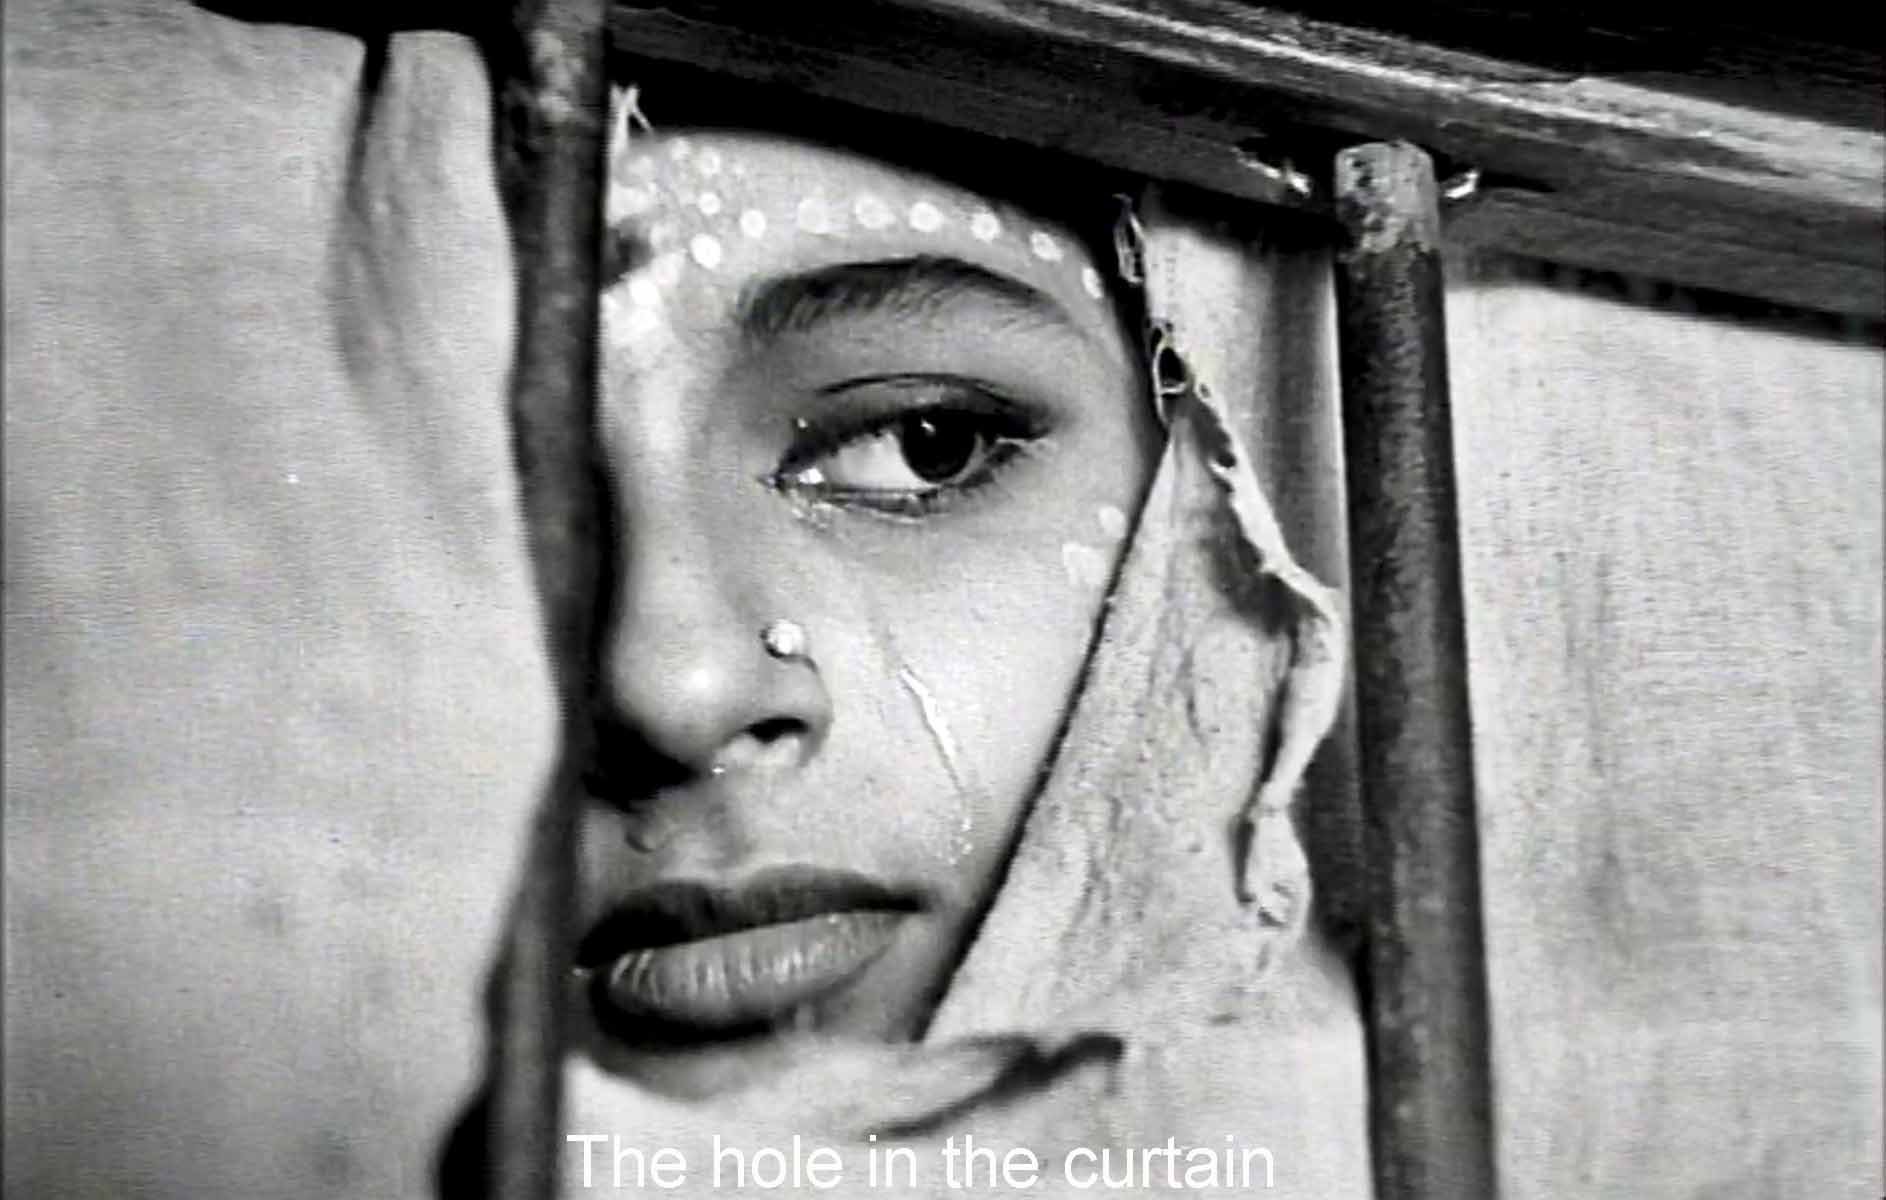 The hole in the curtain